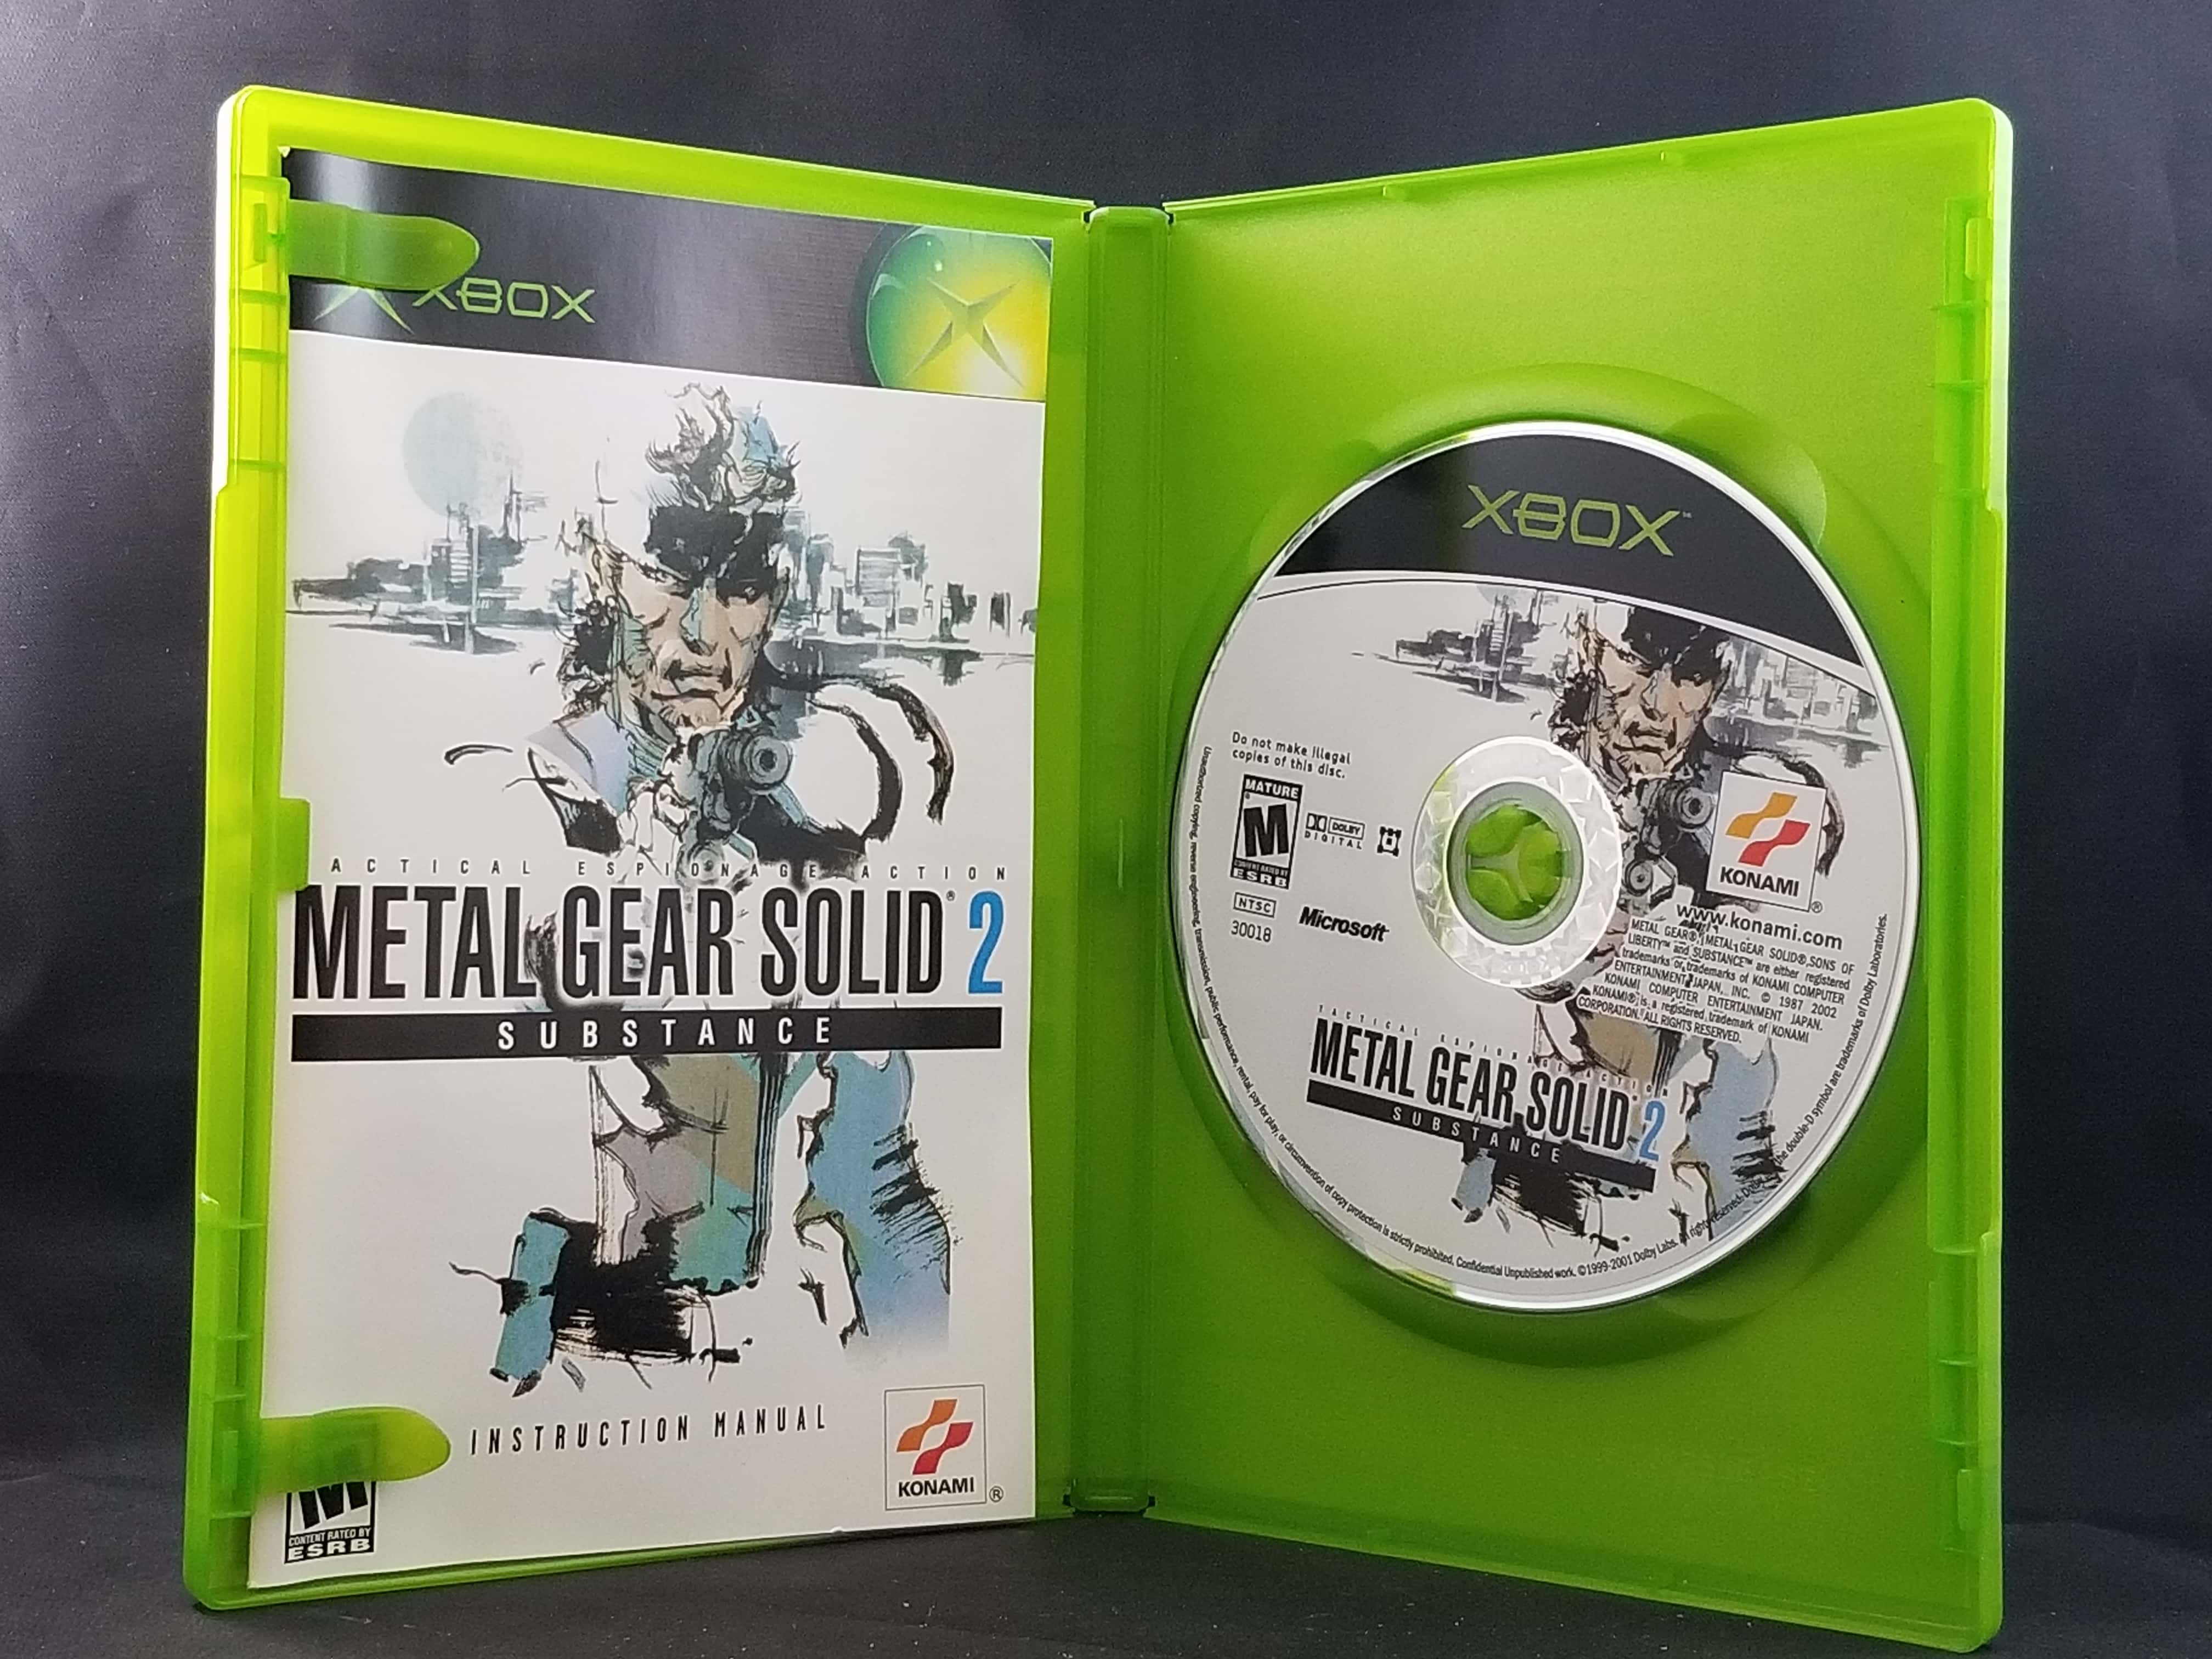 Metal Gear Solid 2: Substance - Xbox